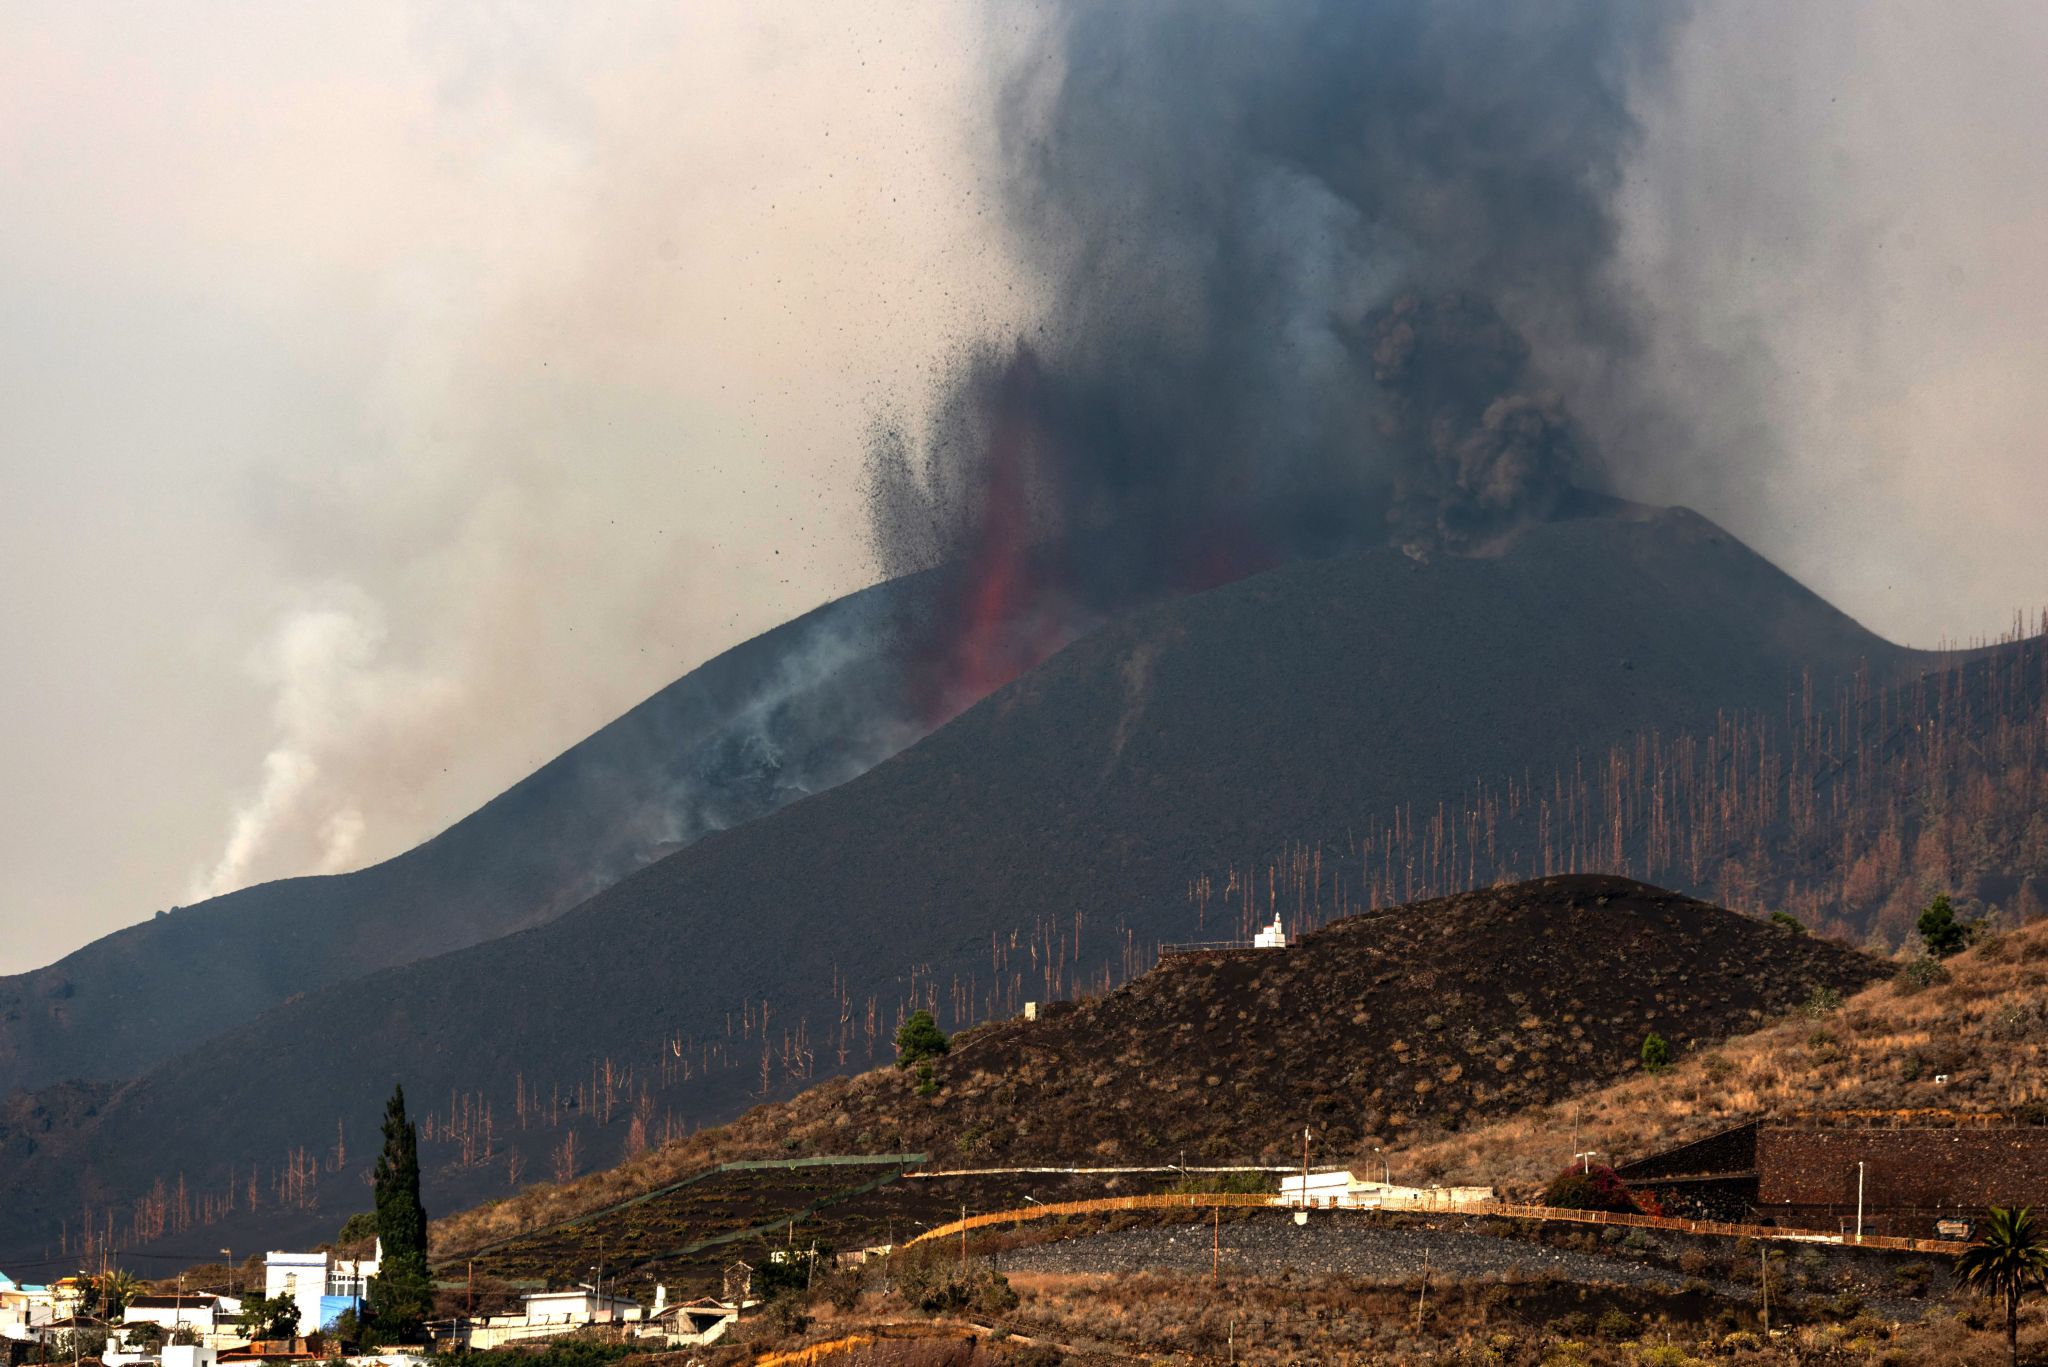 The Cumbre Vieja volcano spews lava, ash and smoke as seen from Los Llanos de Aridane on the Canary island of La Palma in Sept. 26, 2021.